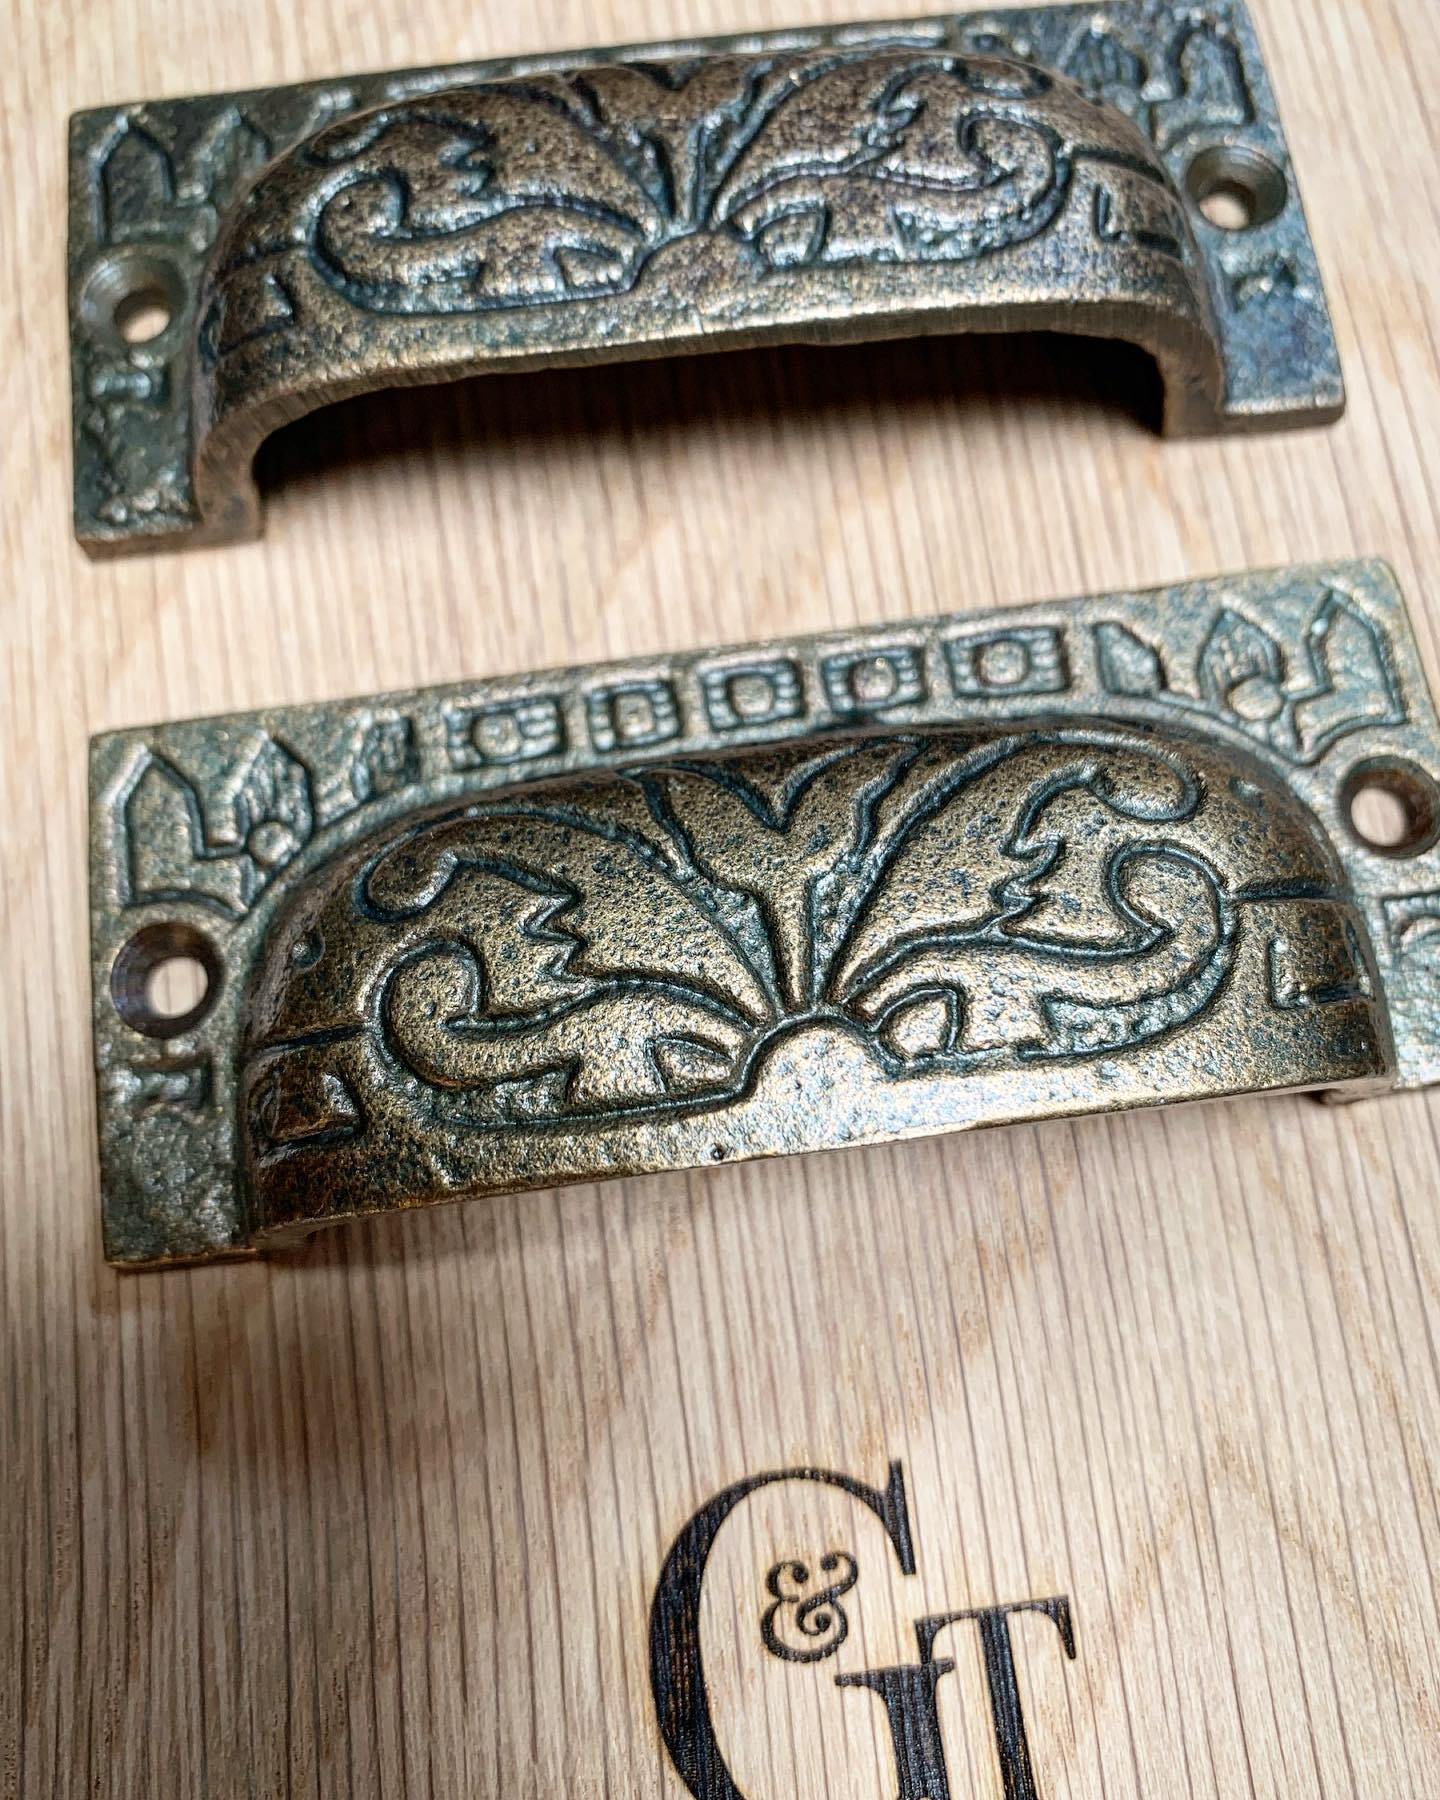 Lovely new handles for some special new ottomans  #handcrafted #homewares #decorativehome #gingerandtweed